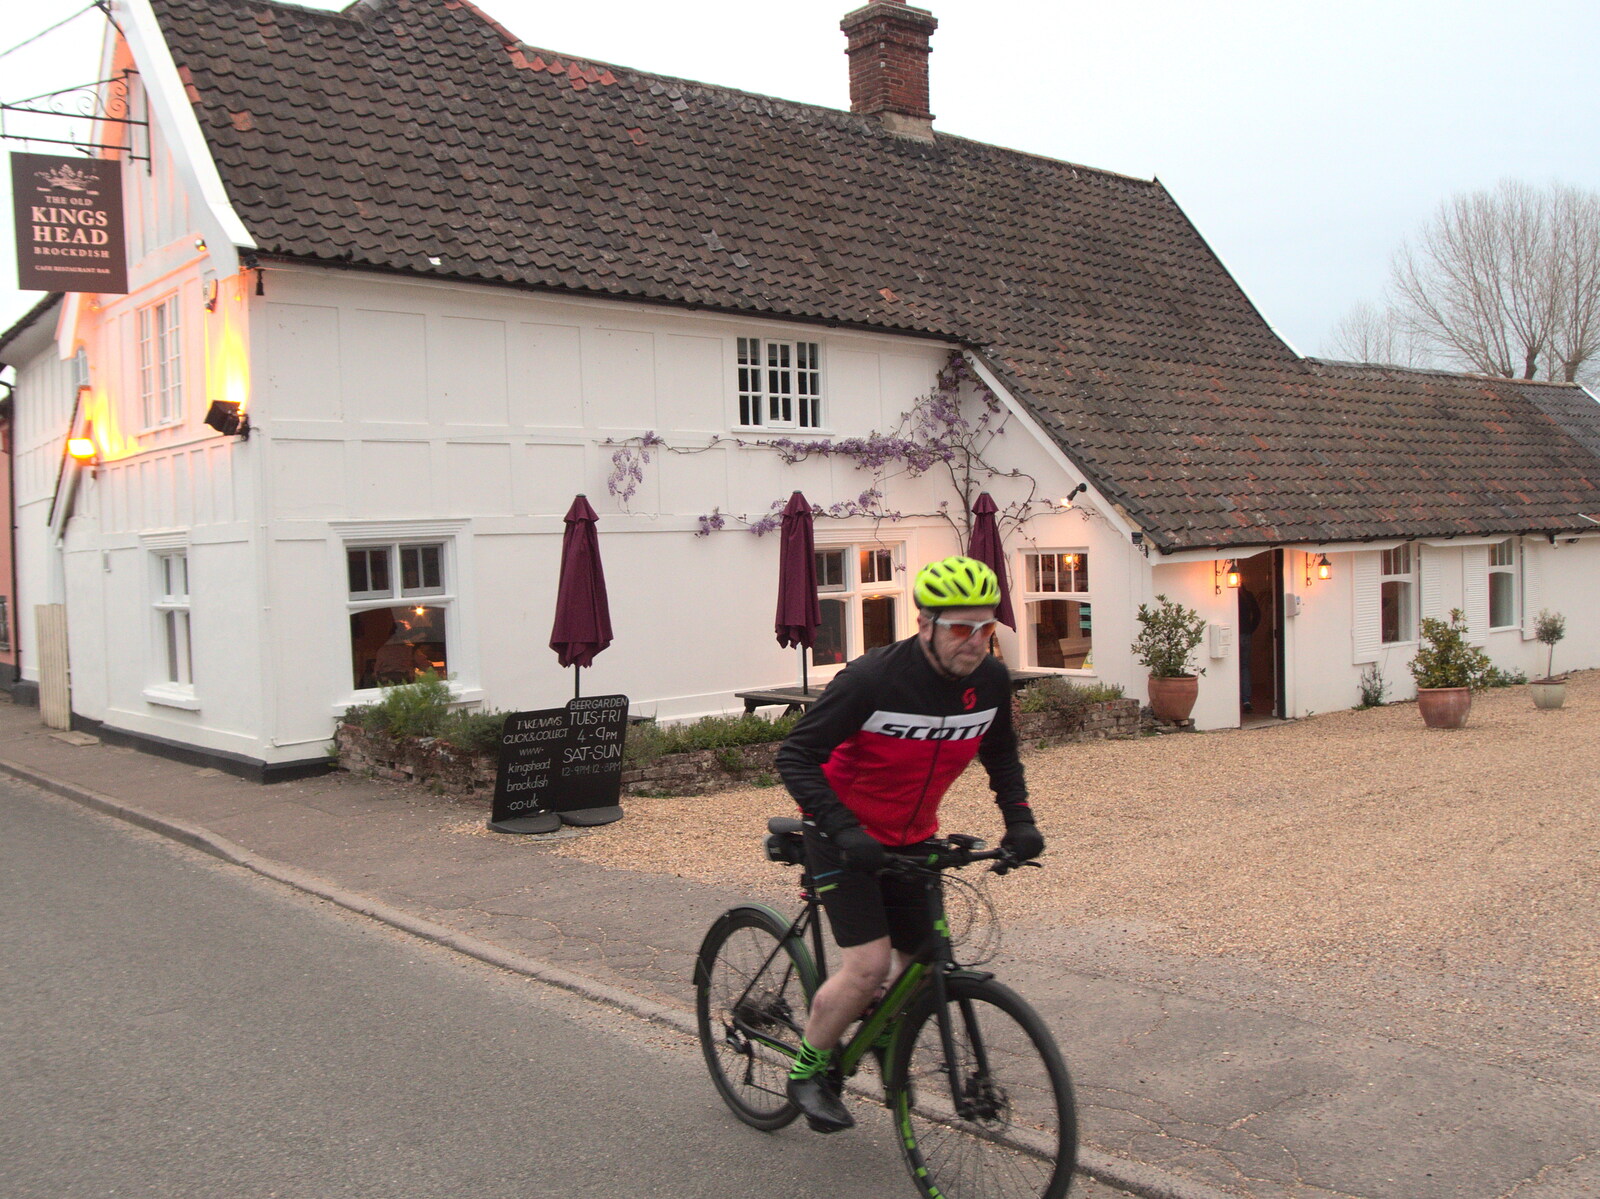 Gaz outside the pub from The BSCC at the King's Head, Brockdish, Norfolk - 13th May 2021